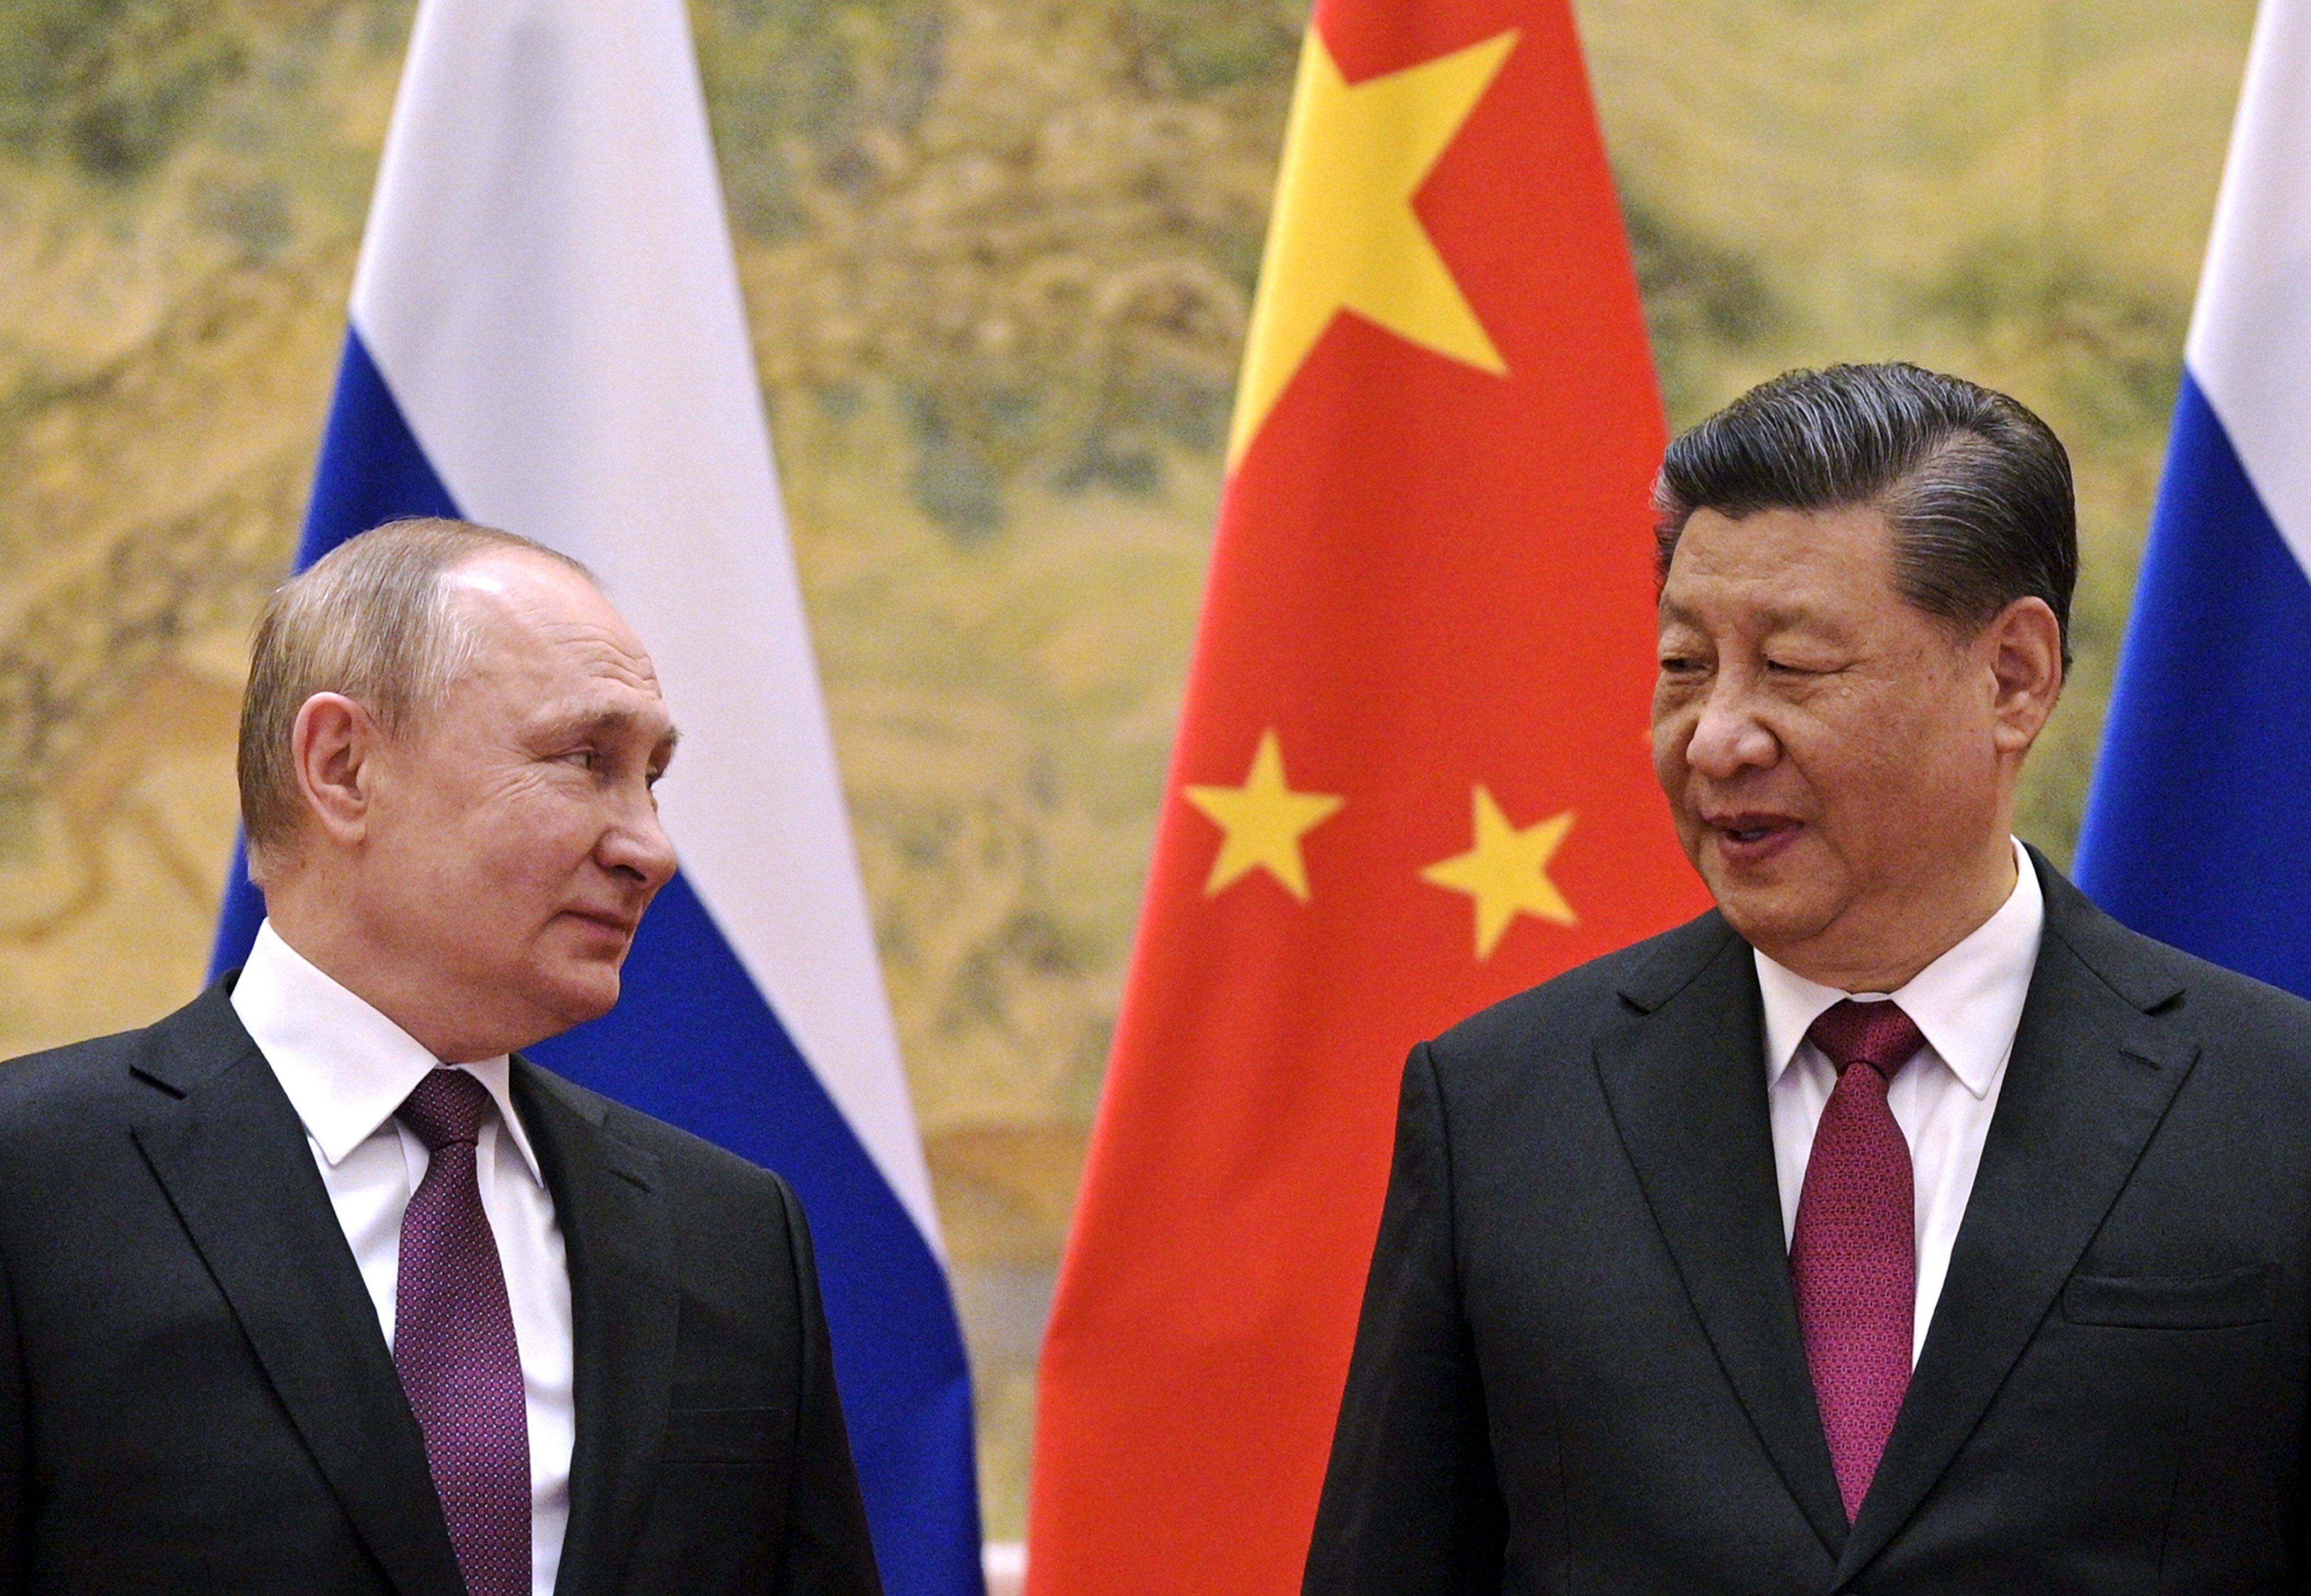 Russian President Vladimir Putin (left) and Chinese President Xi Jinping chat during their meeting in Beijing on February 4. Photo: AP